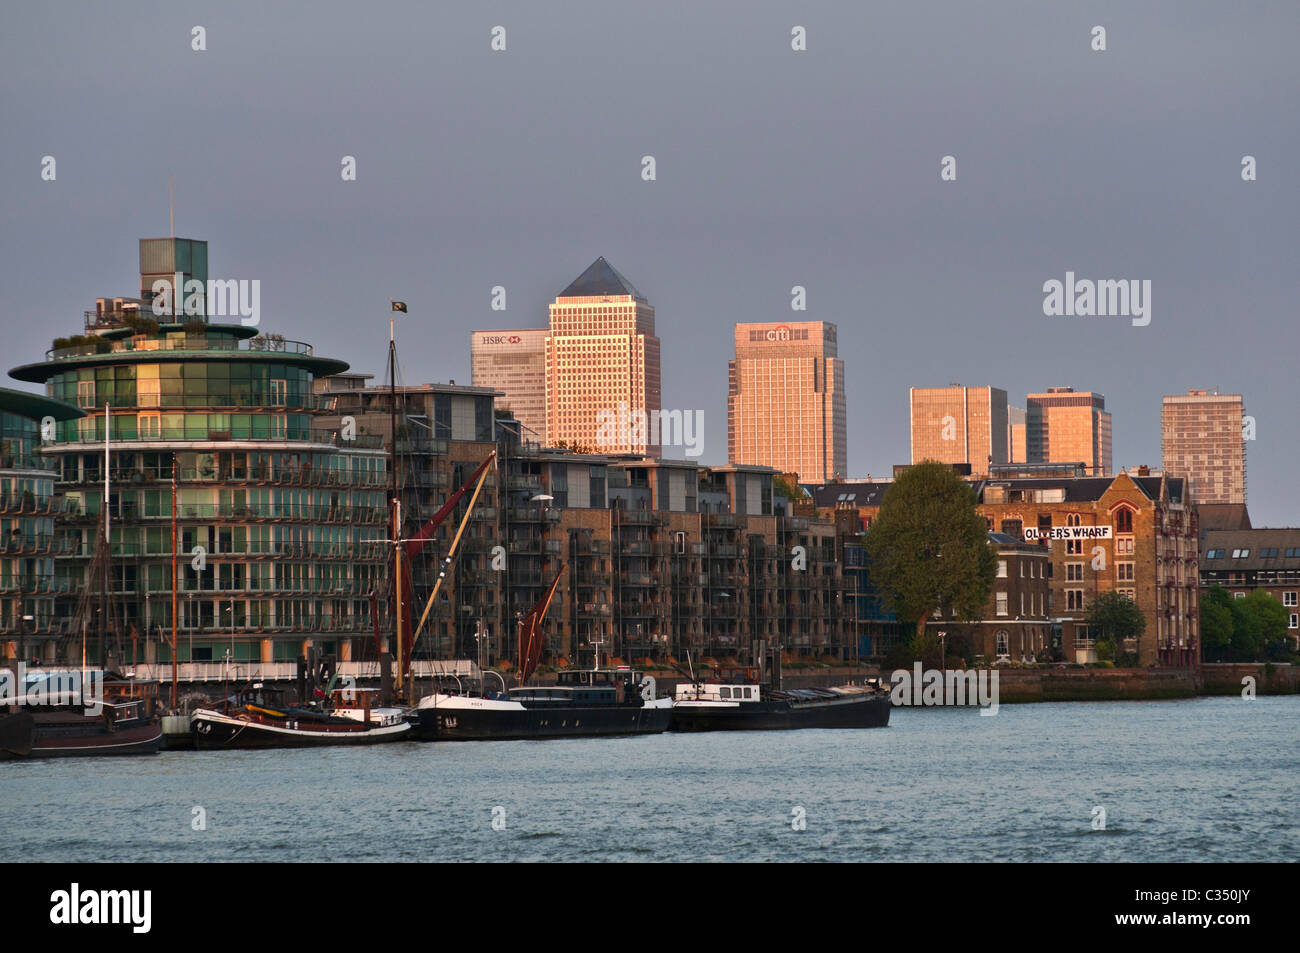 View to Oliver's Wharf and Canary Wharf skyscrapers Wapping London UK Stock Photo